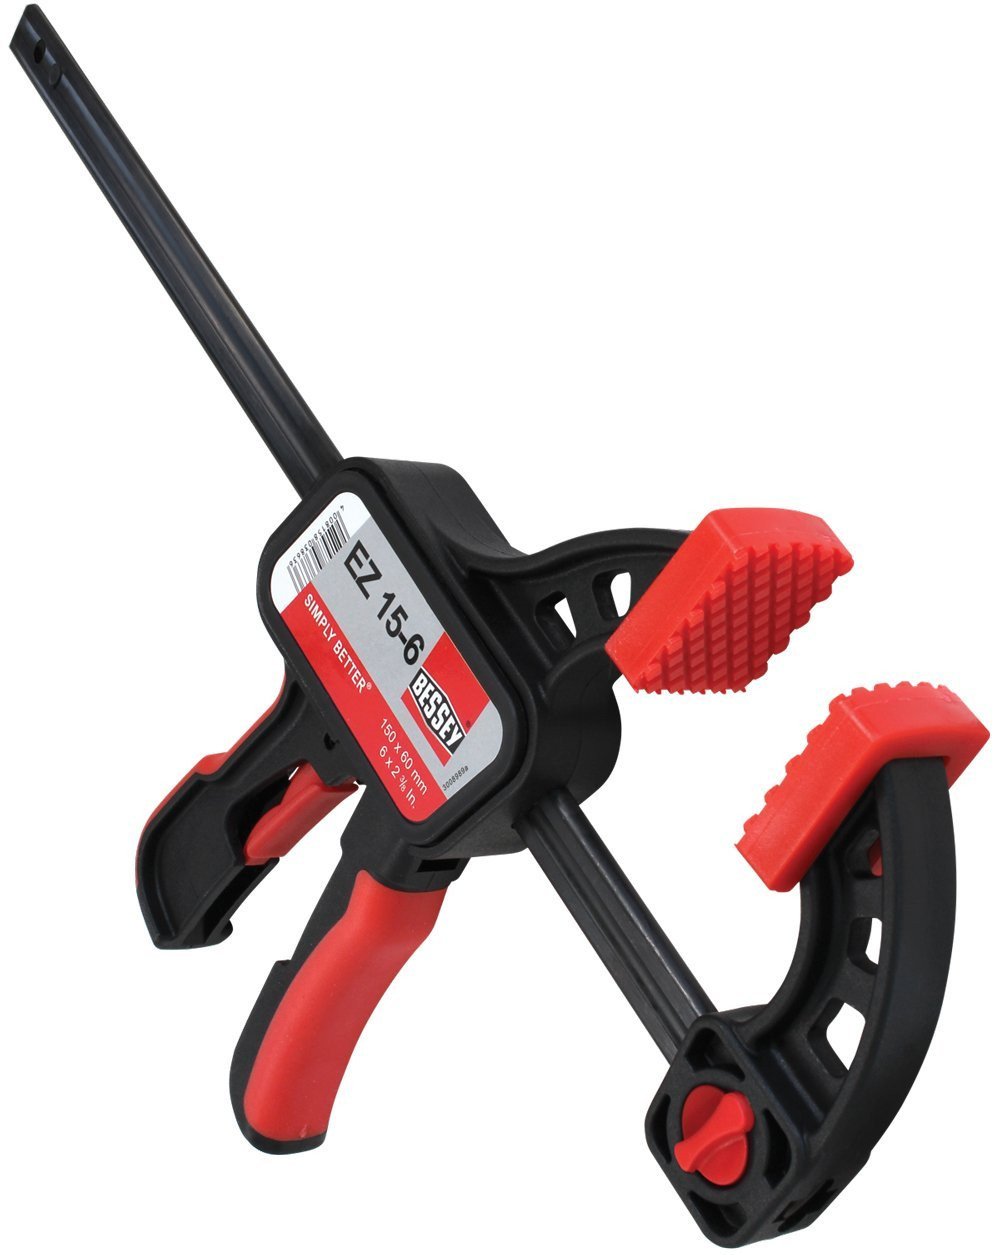 One Handed Trigger Clamp for Compressing & Spreading 6" Capacity x 2 3/8" Throat Depth, Red/Black